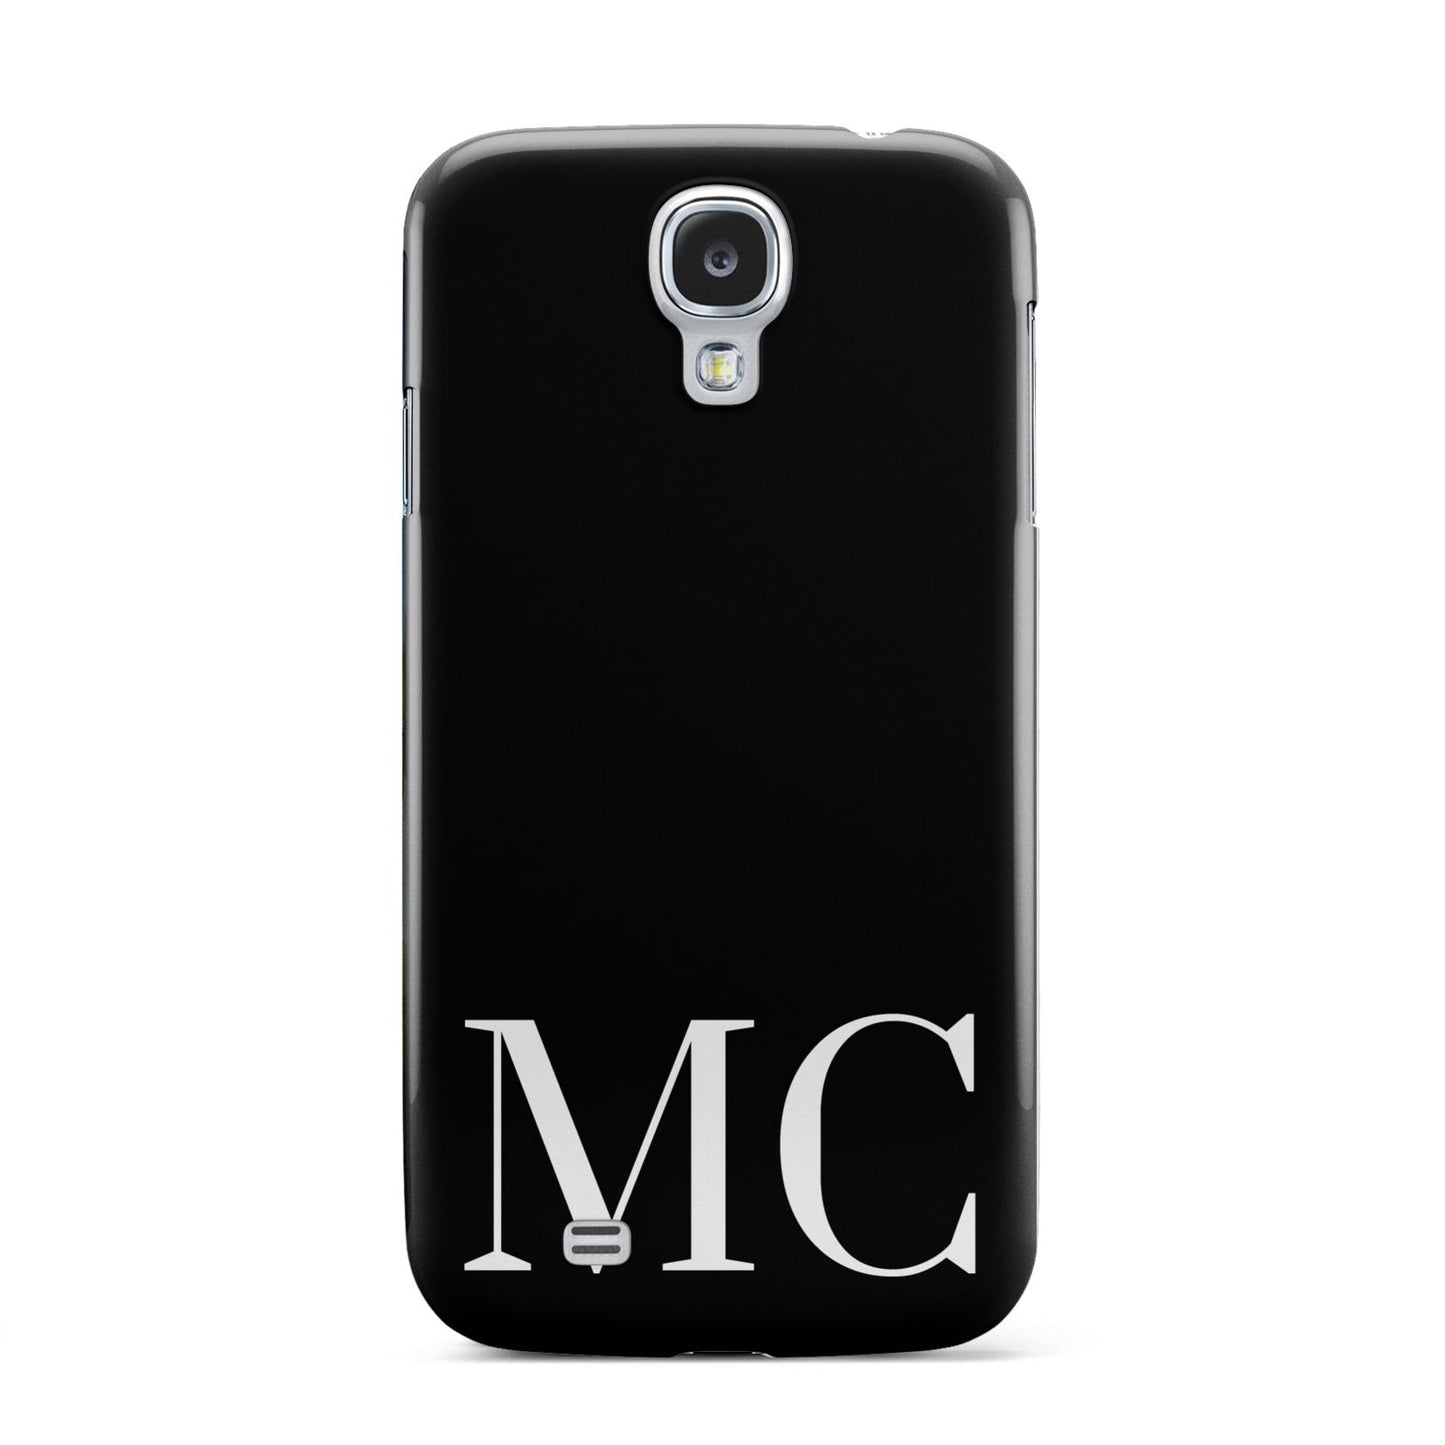 Initials Personalised 1 Samsung Galaxy S4 Case